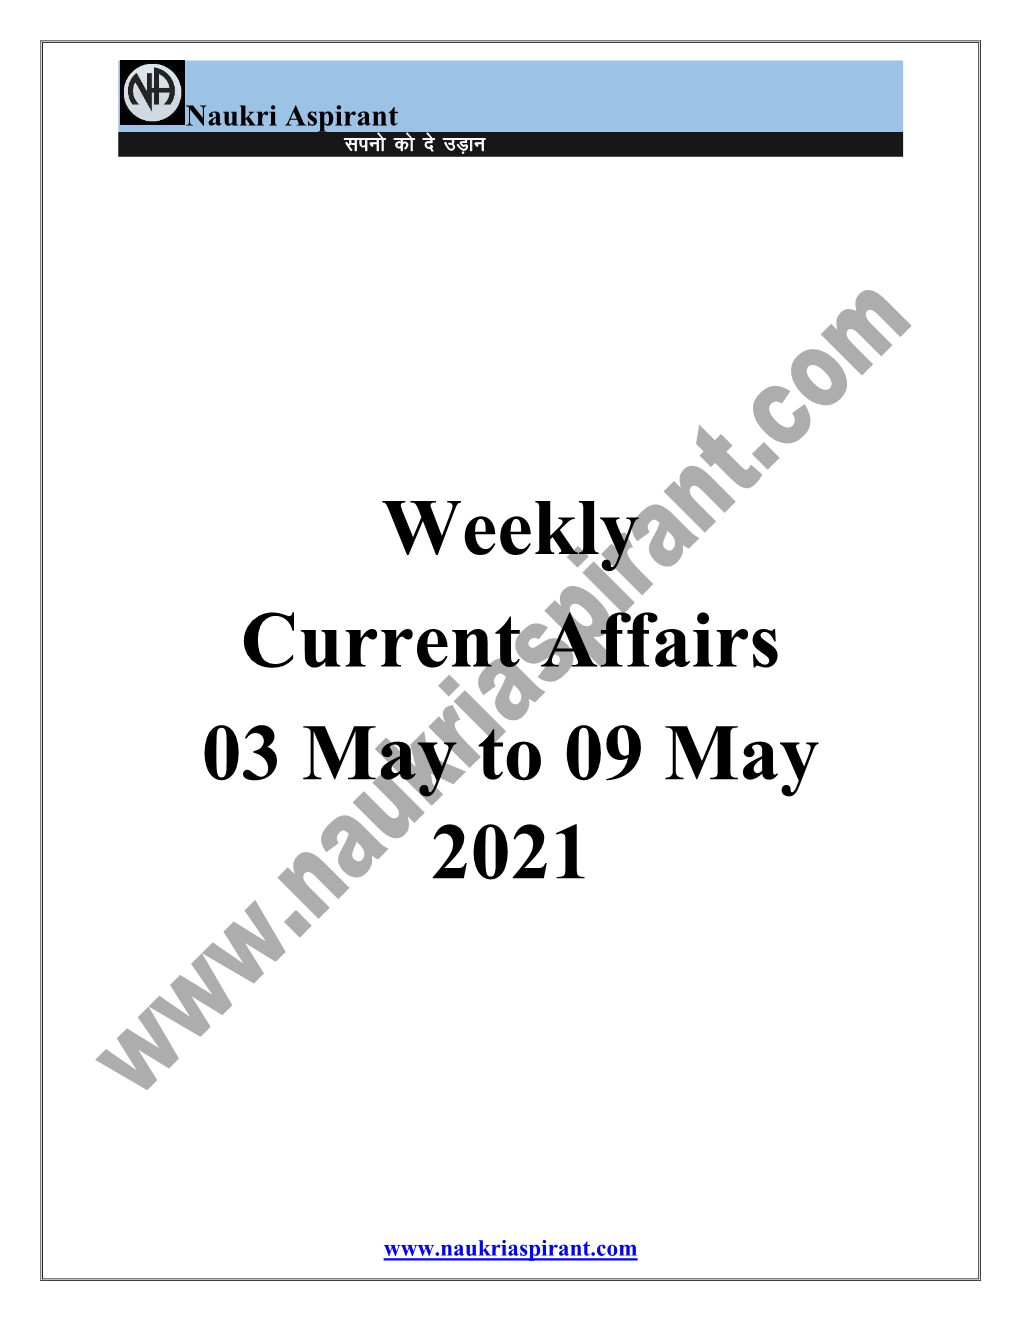 Weekly Current Affairs 03 May to 09 May 2021